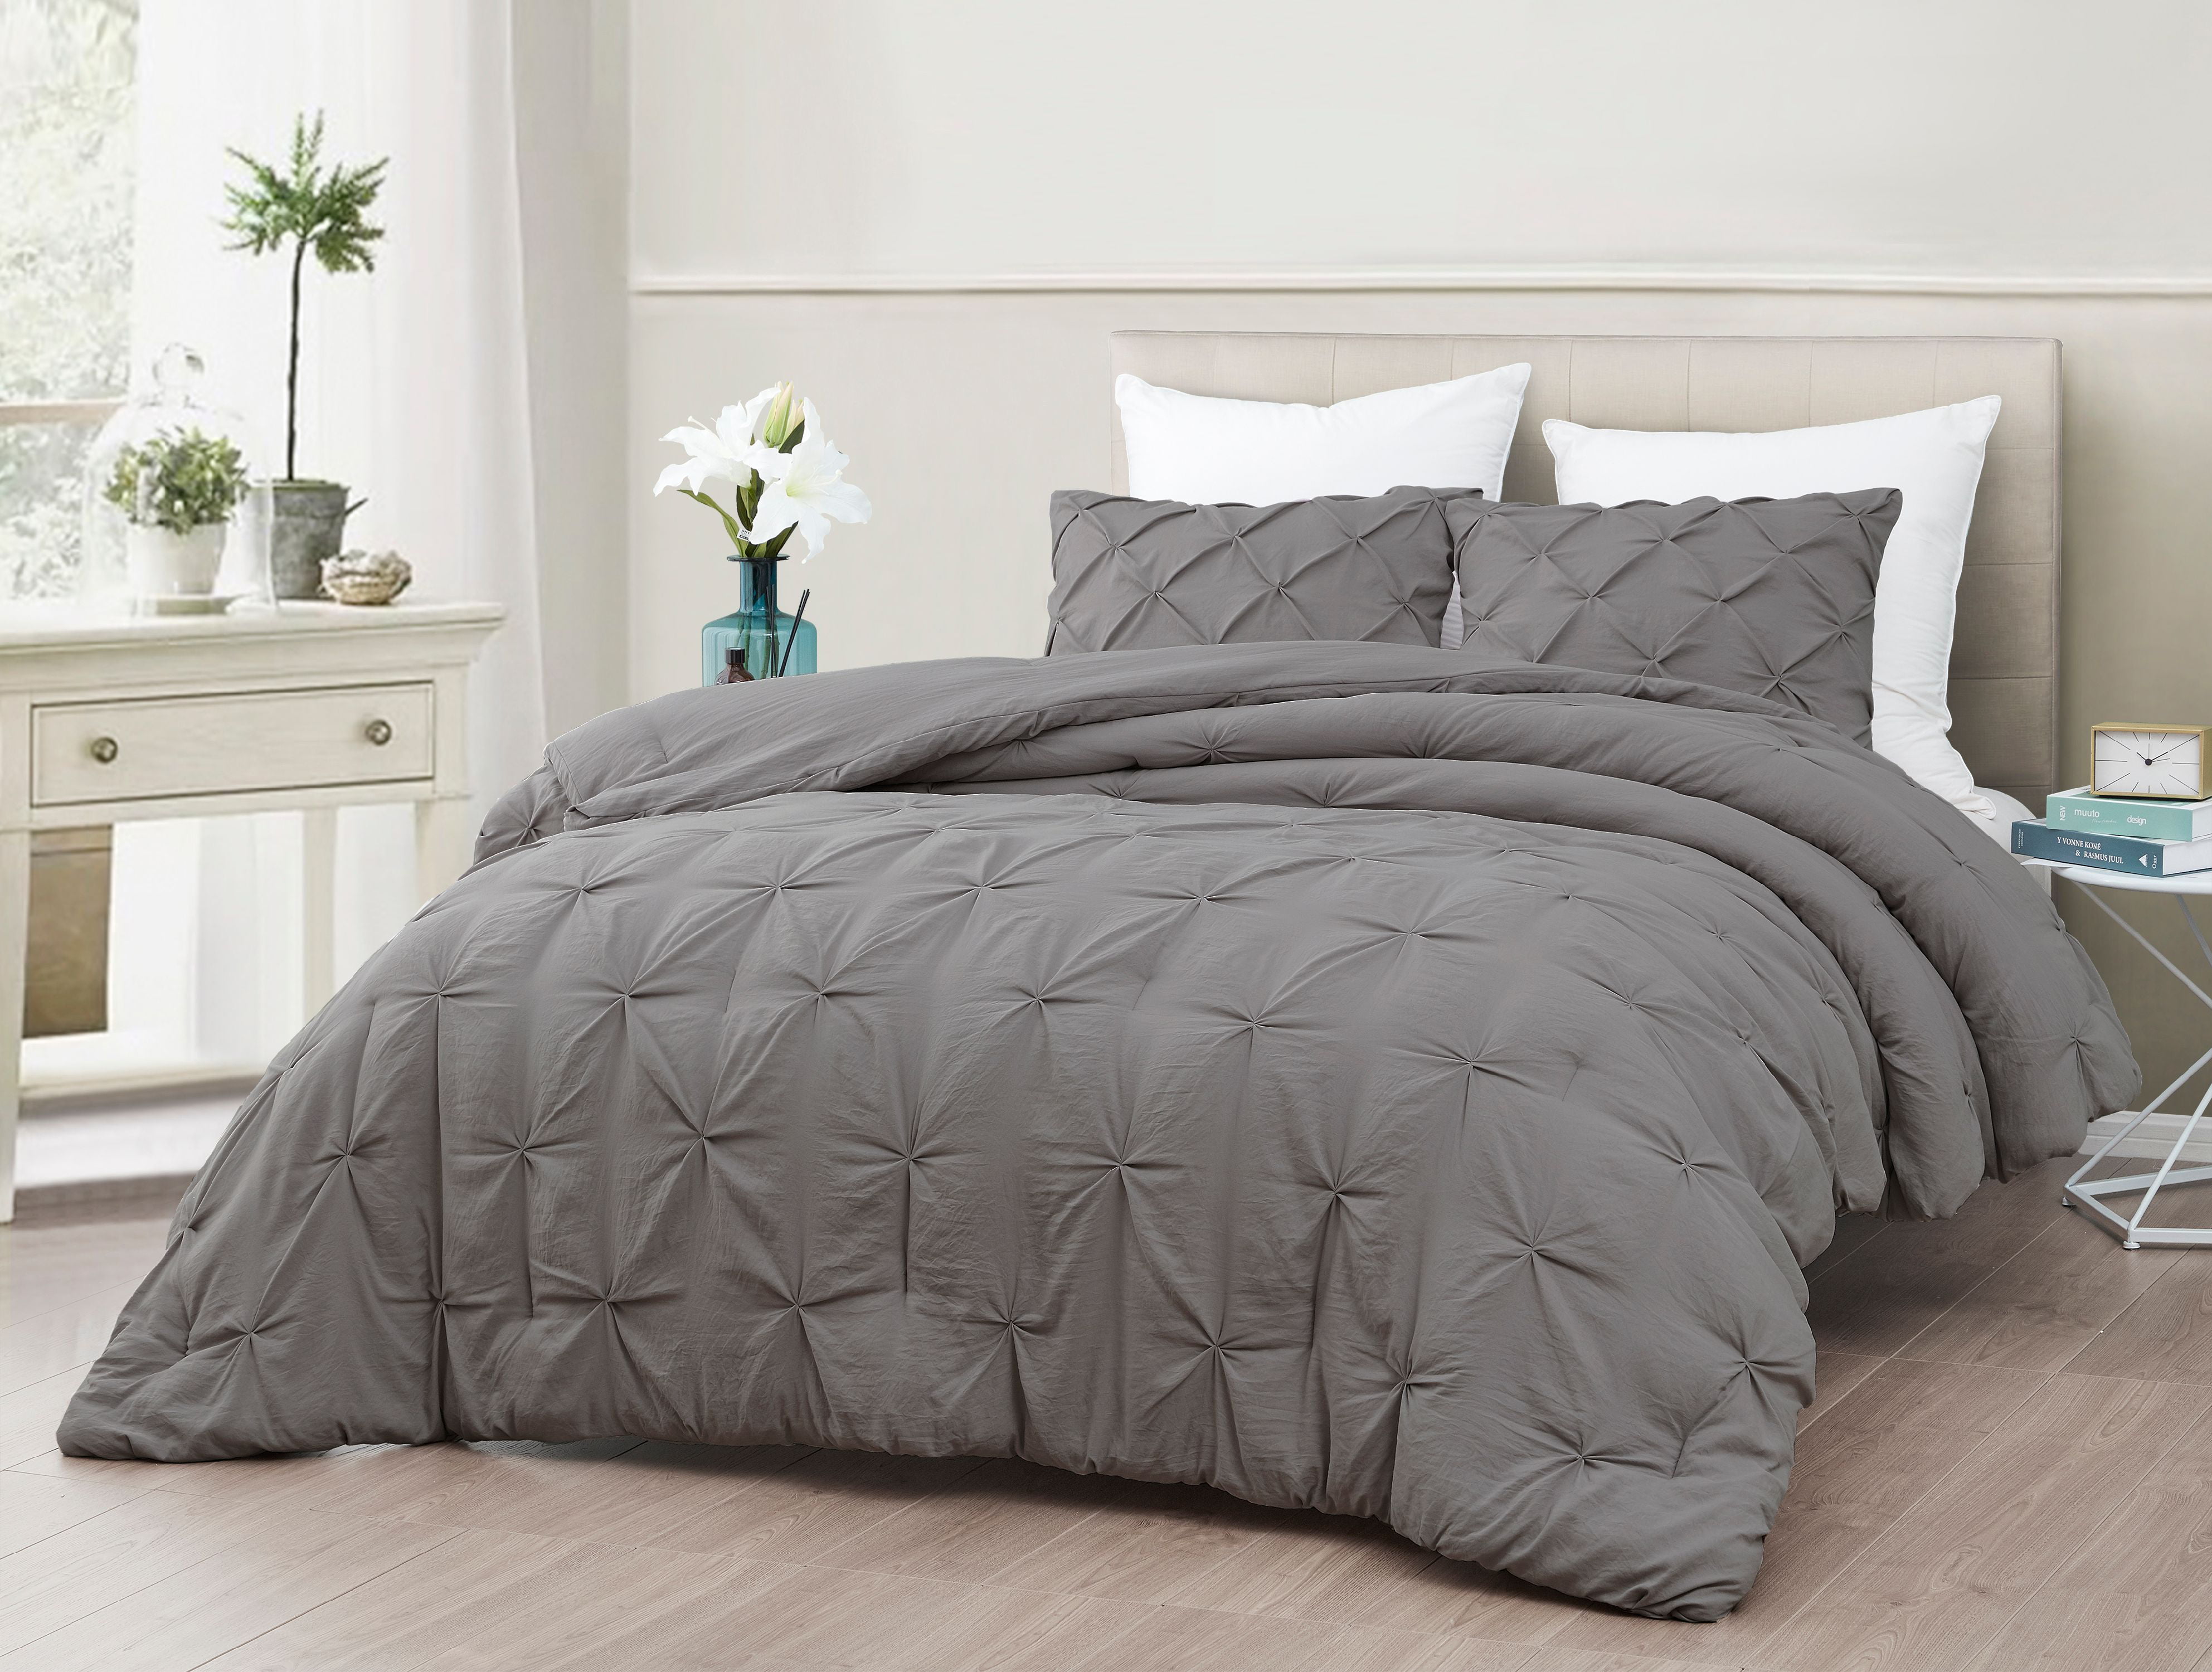 Ultra Soft Stone Washed Comforter Set, Grey Twin Bed Comforter